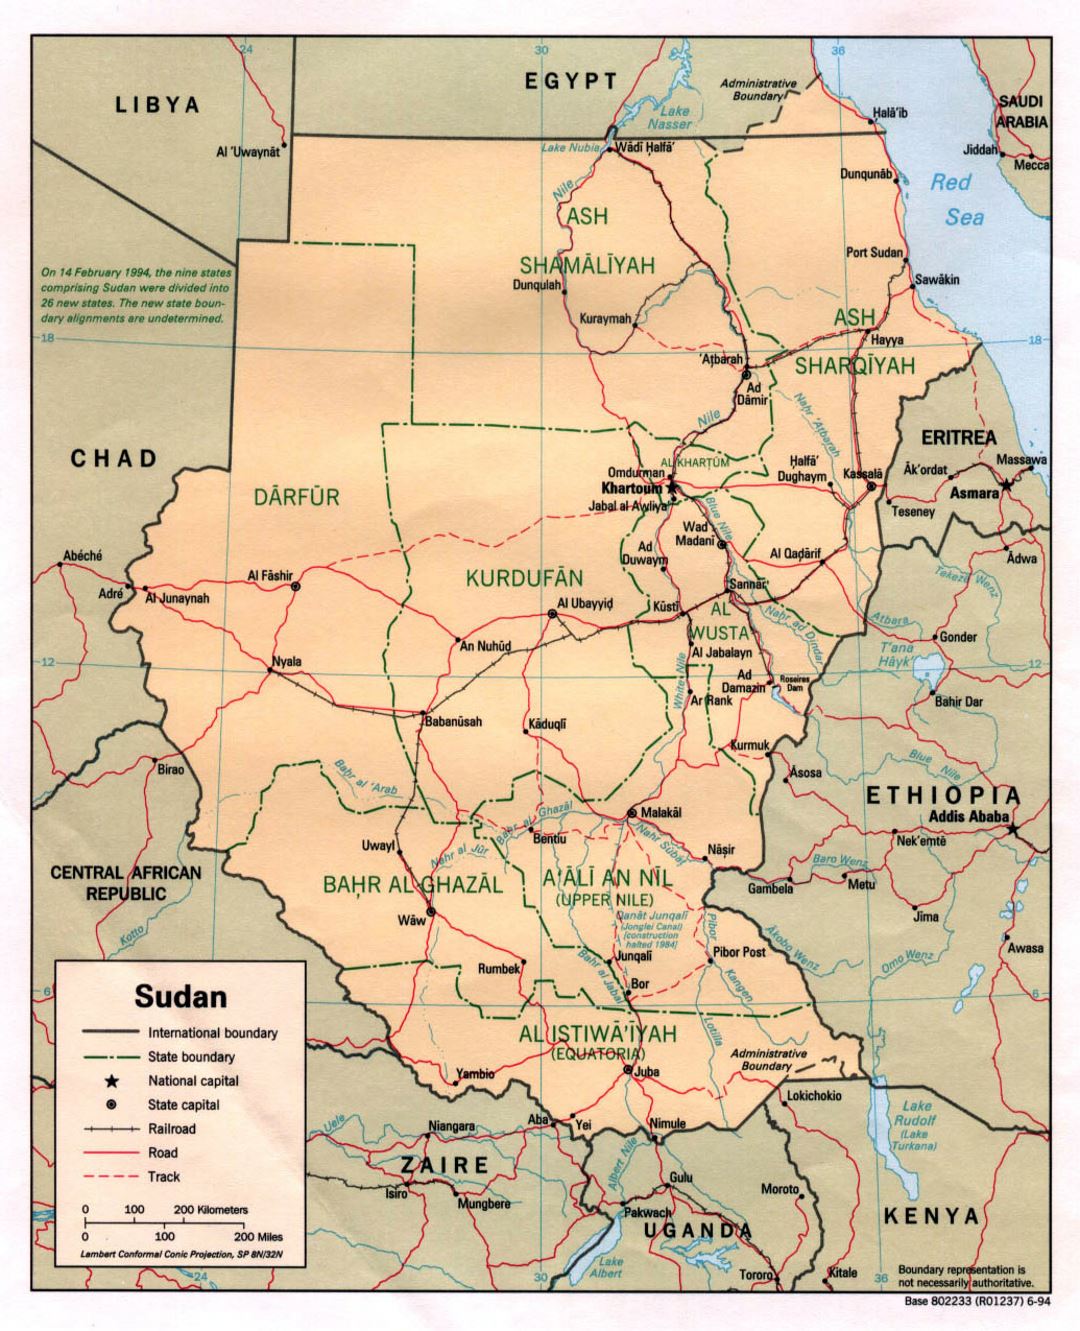 Detailed political and administrative map of Sudan with roads, railroads and major cities - 1994